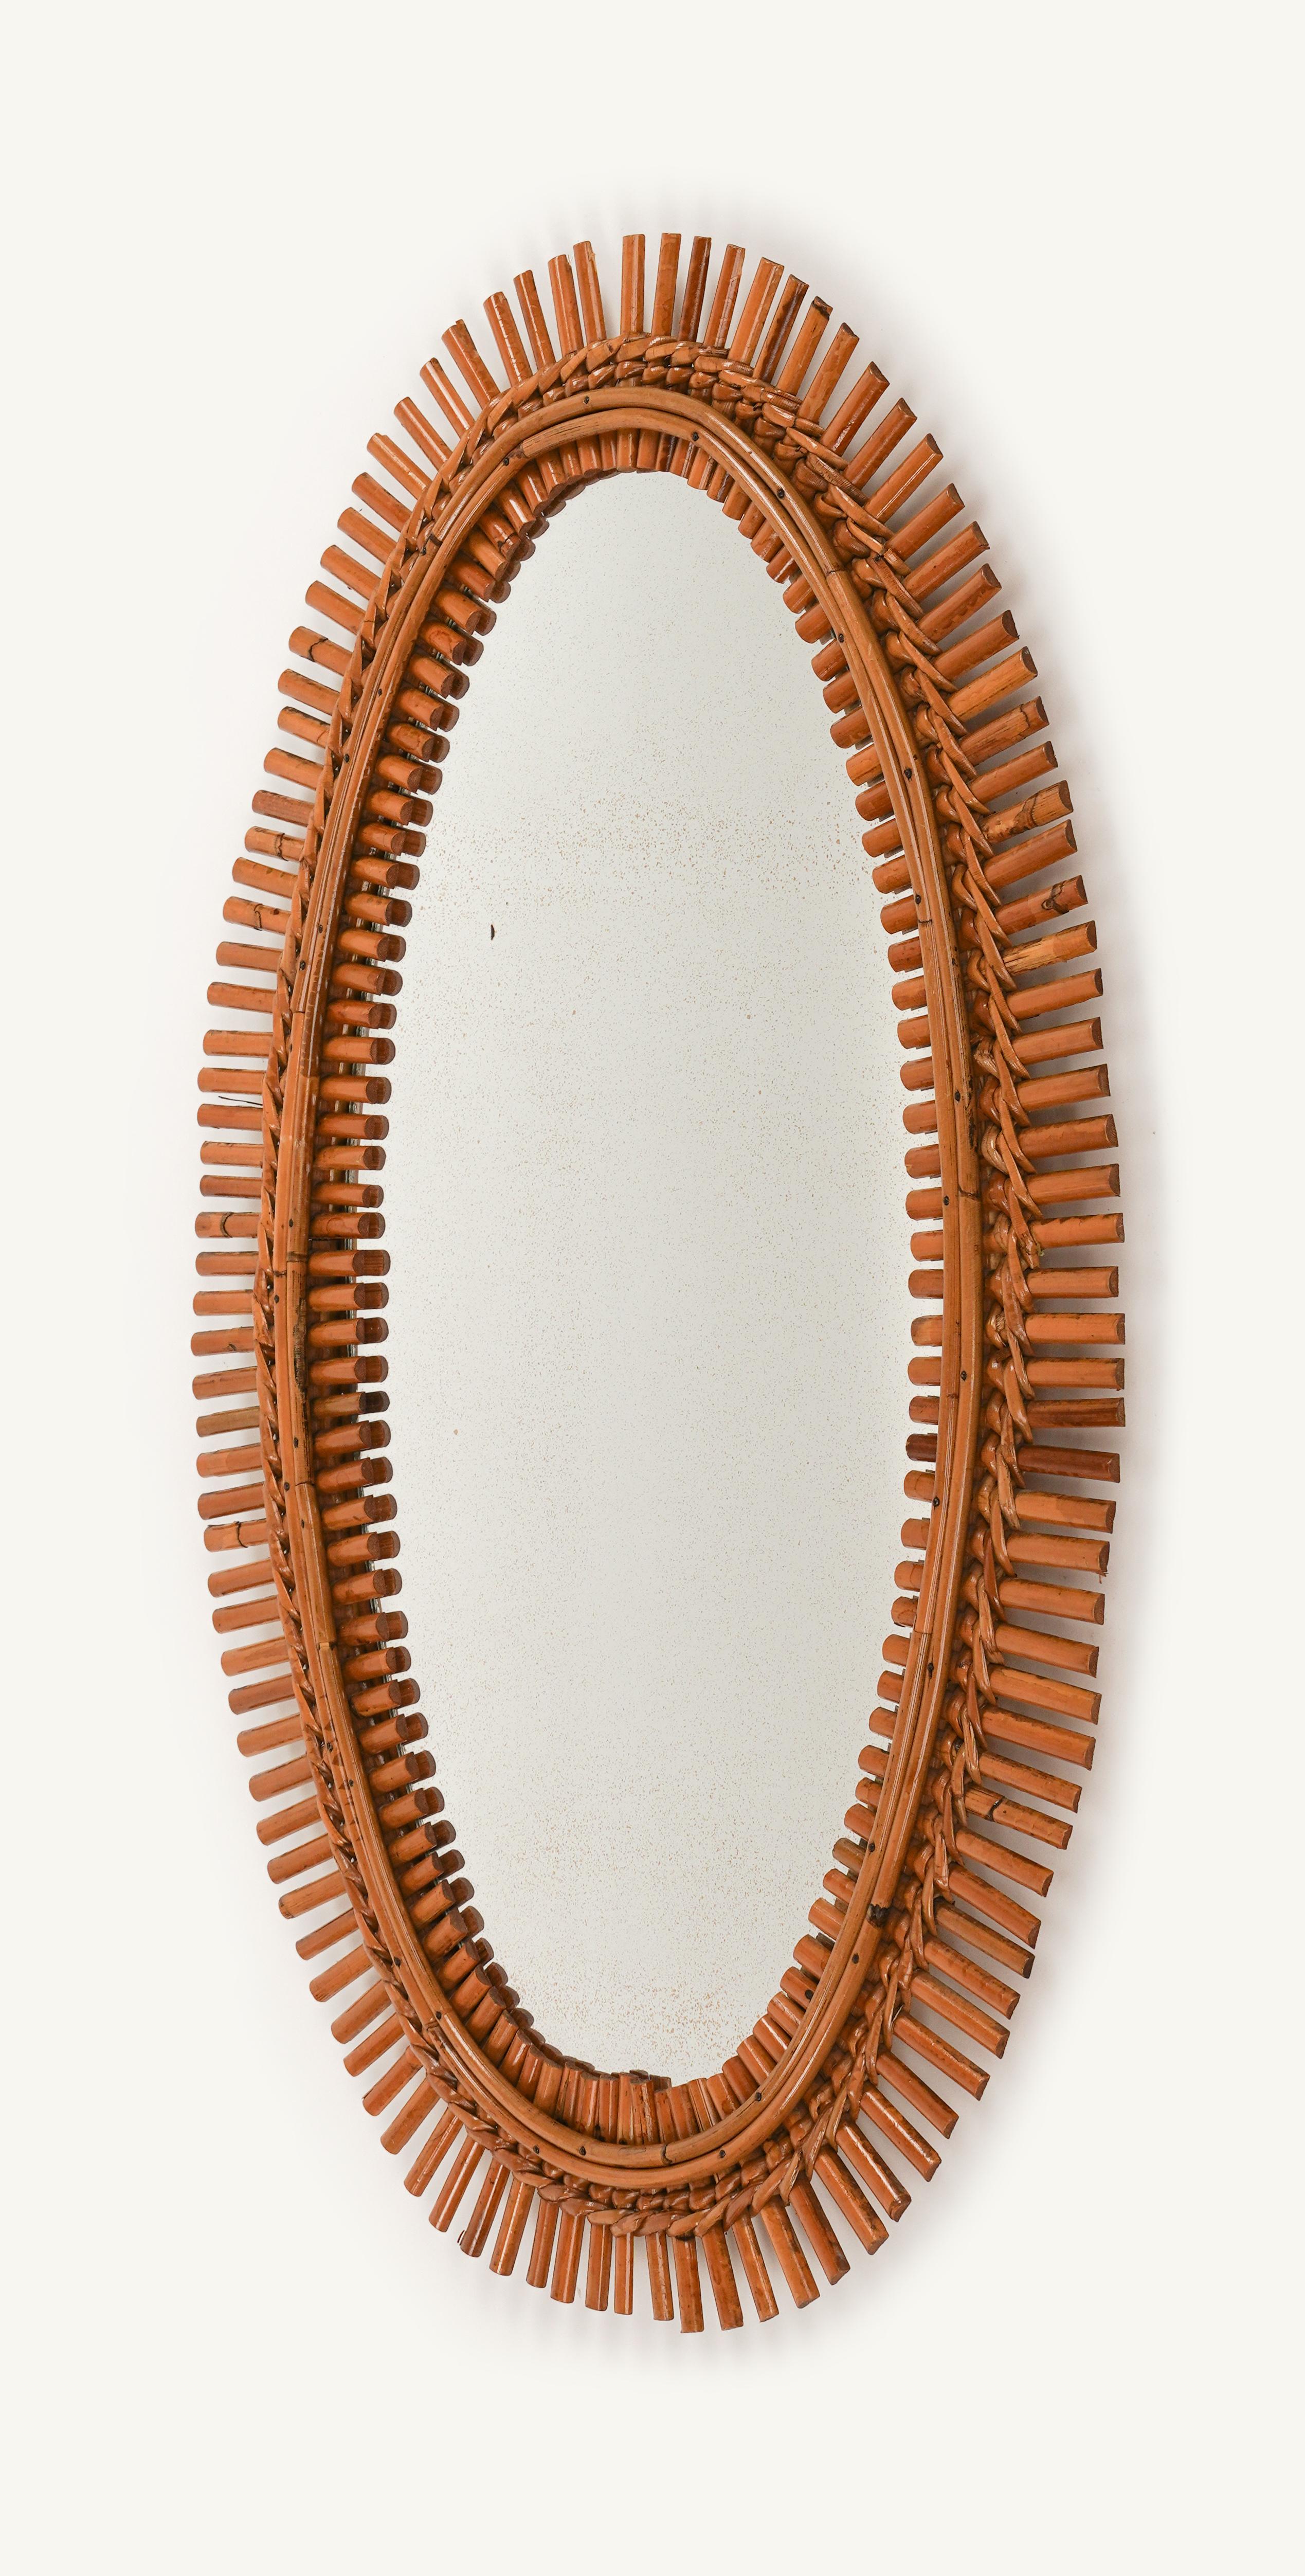 Midcentury Rattan and Bamboo Oval Wall Mirror, Italy 1960s For Sale 1